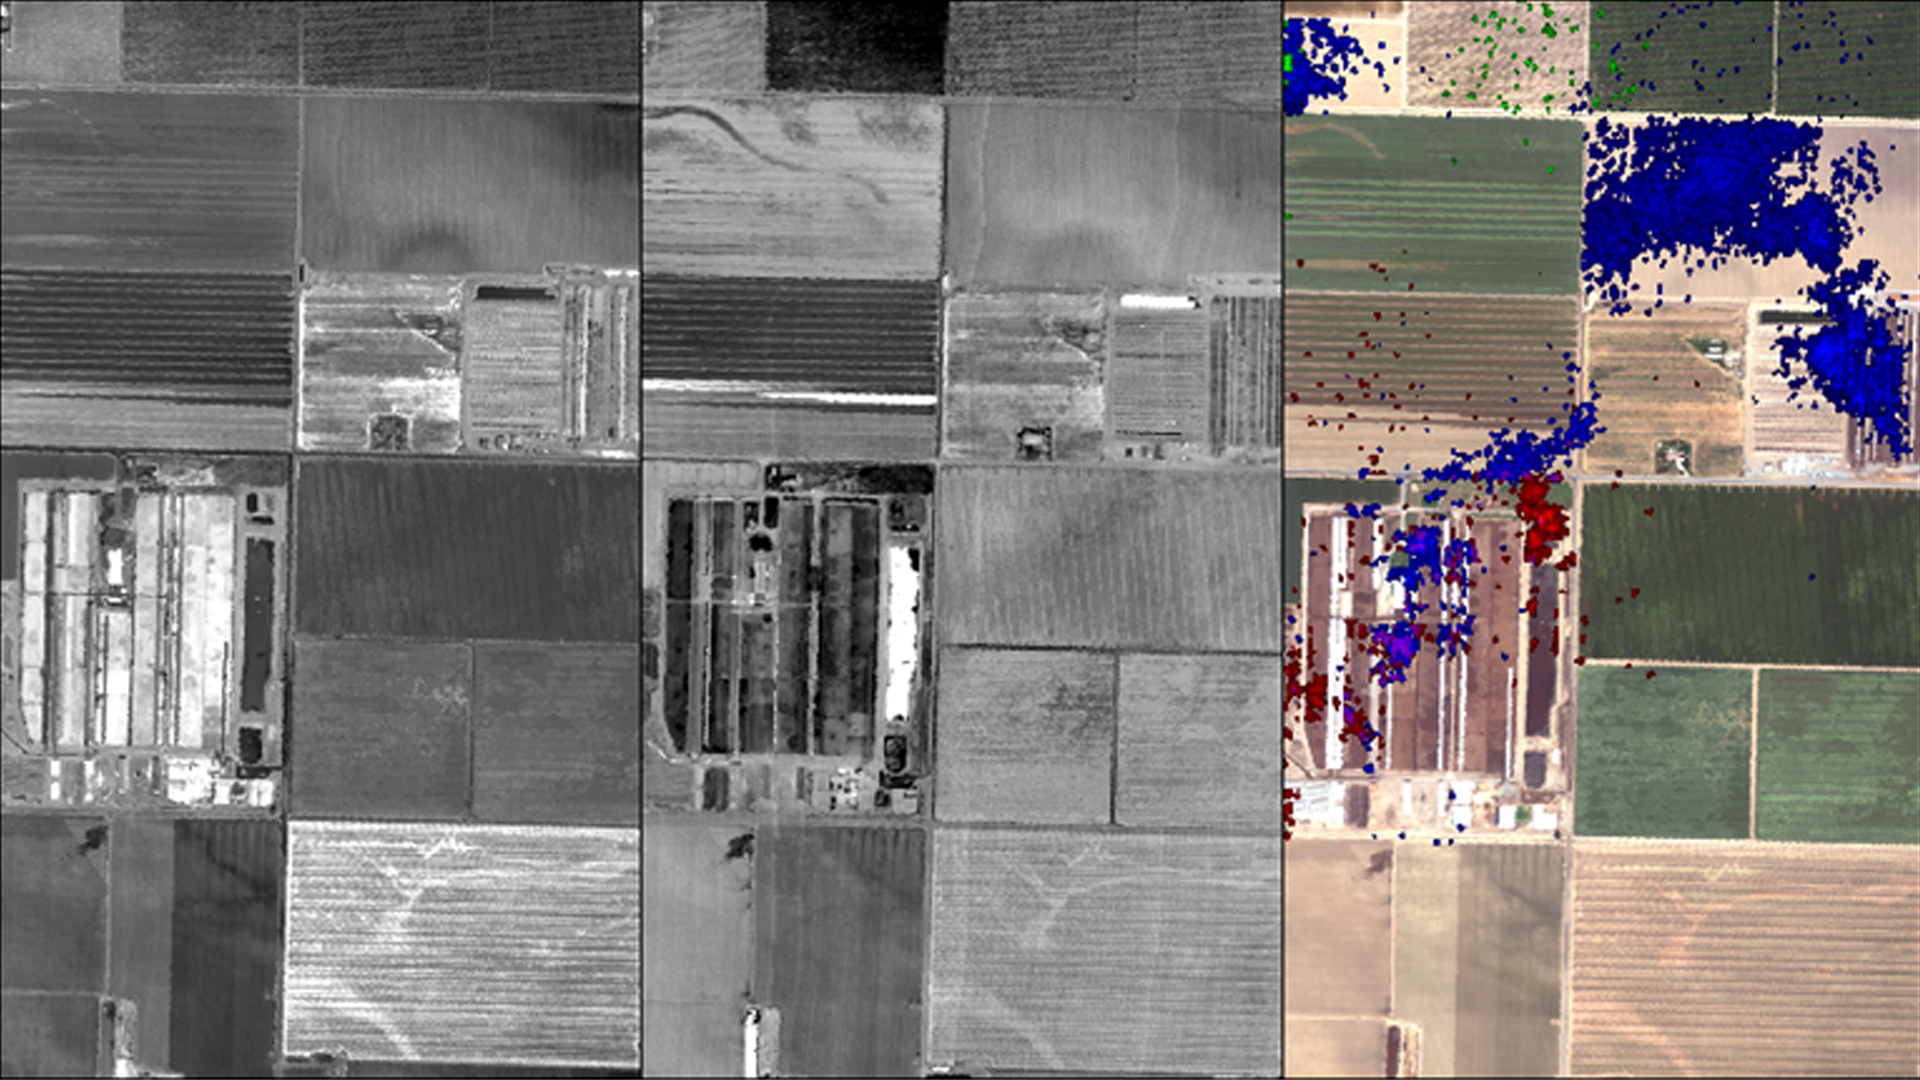 Identifying Methane Emissions Patterns from Dairy Farms Using Aircraft Remote Sensing Observations and Image Classification